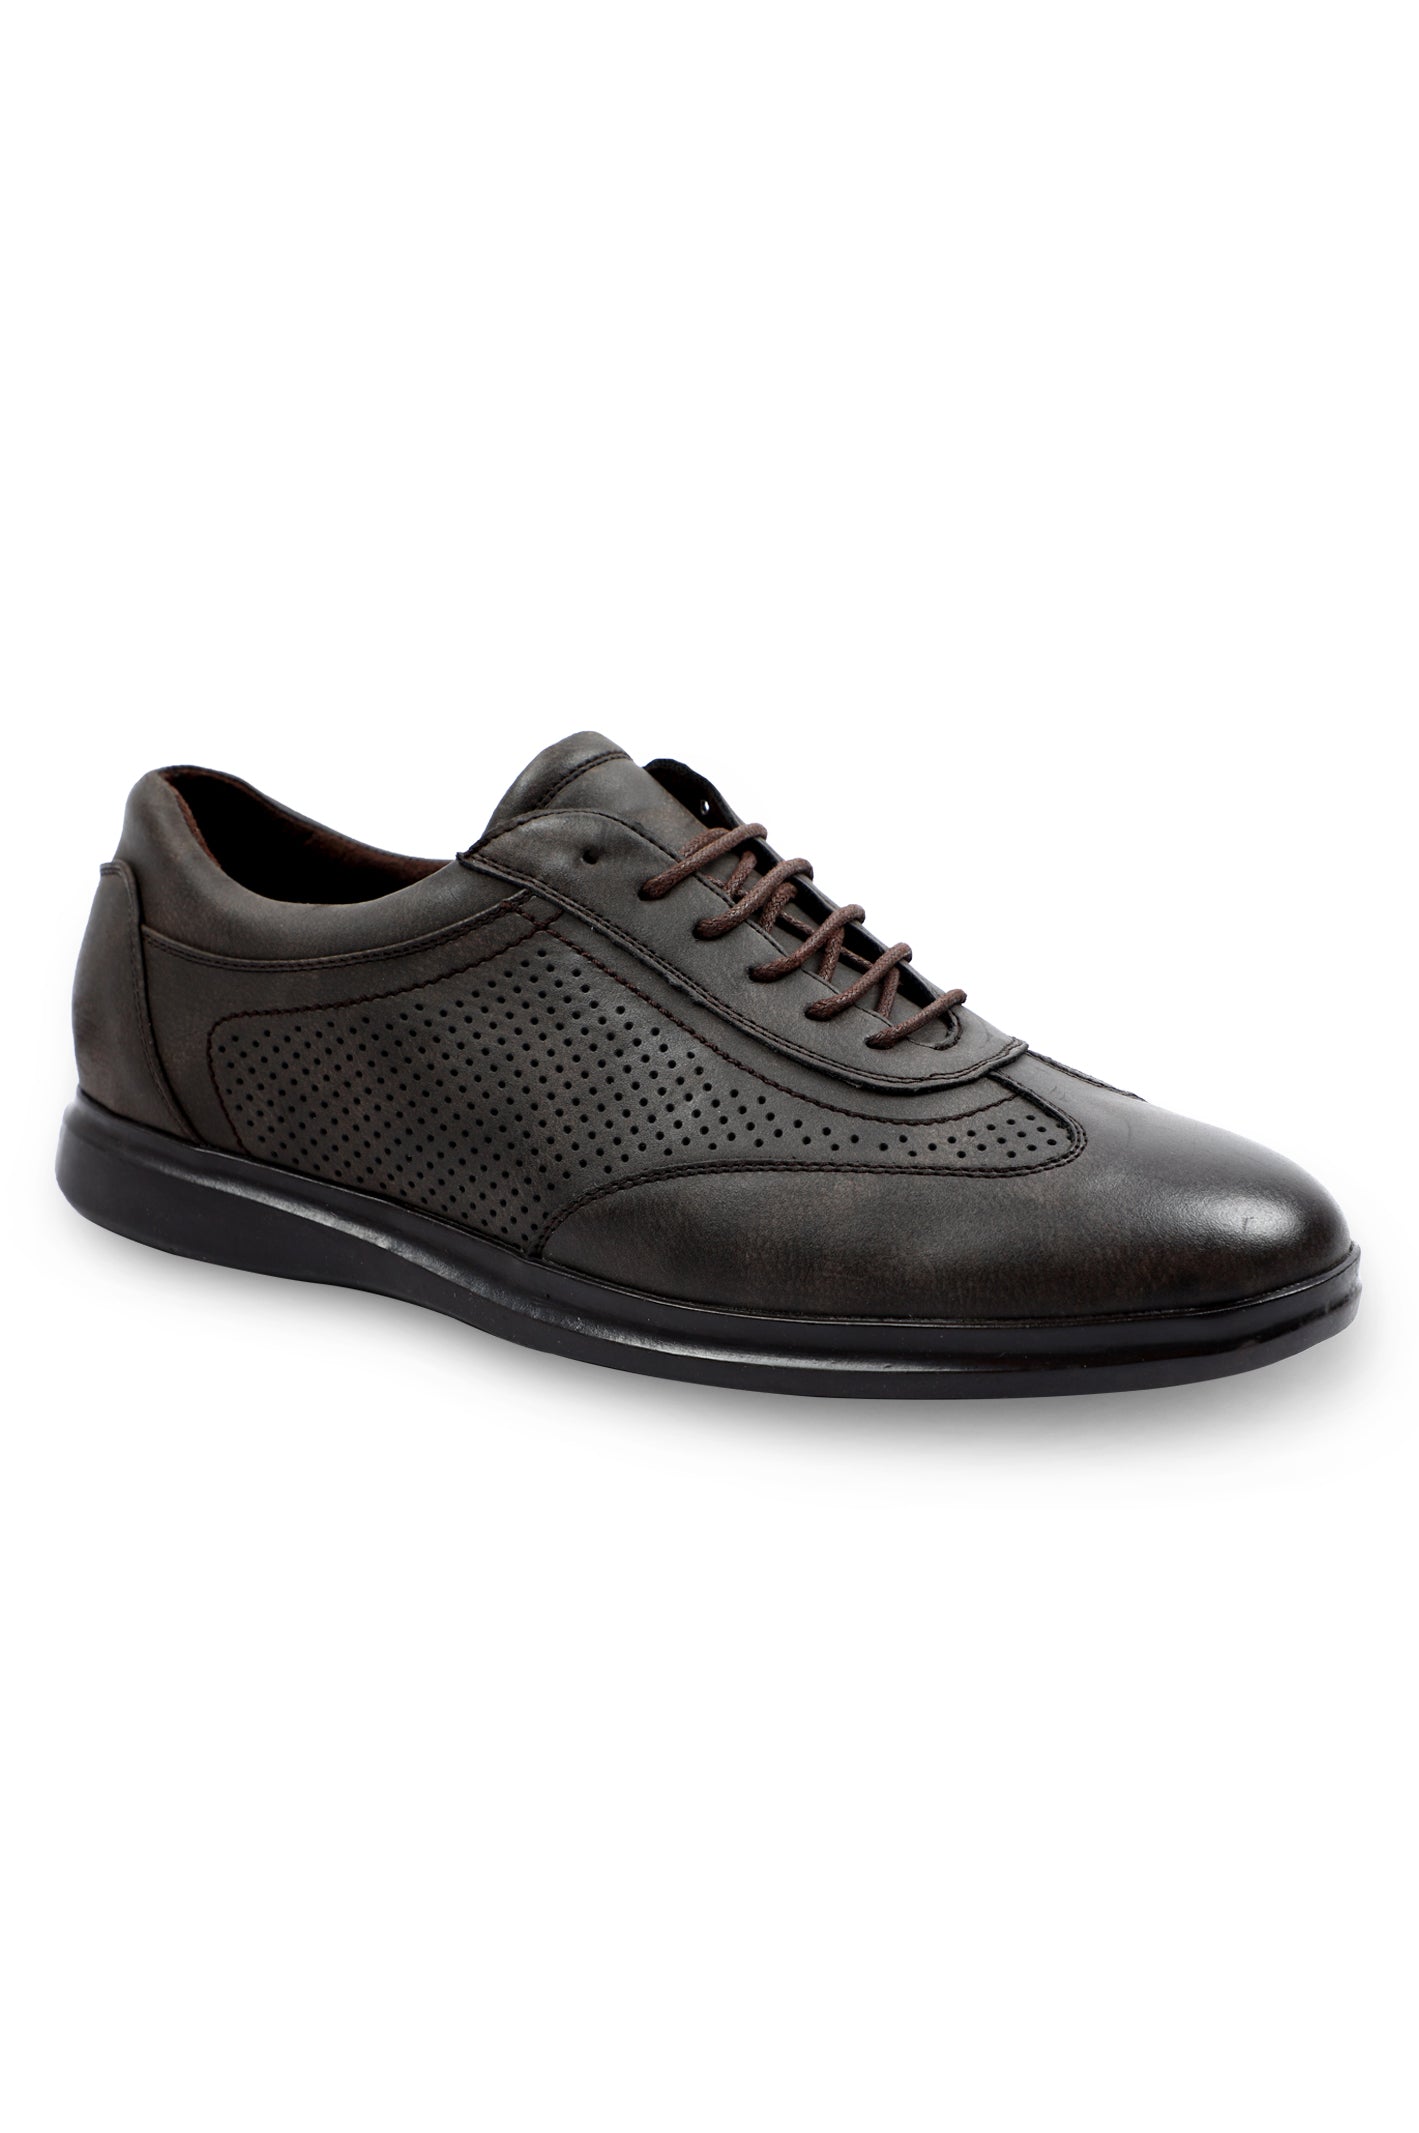 Casual Shoes For Men in Coffee SKU: SMJ0009-COFFEE - Diners